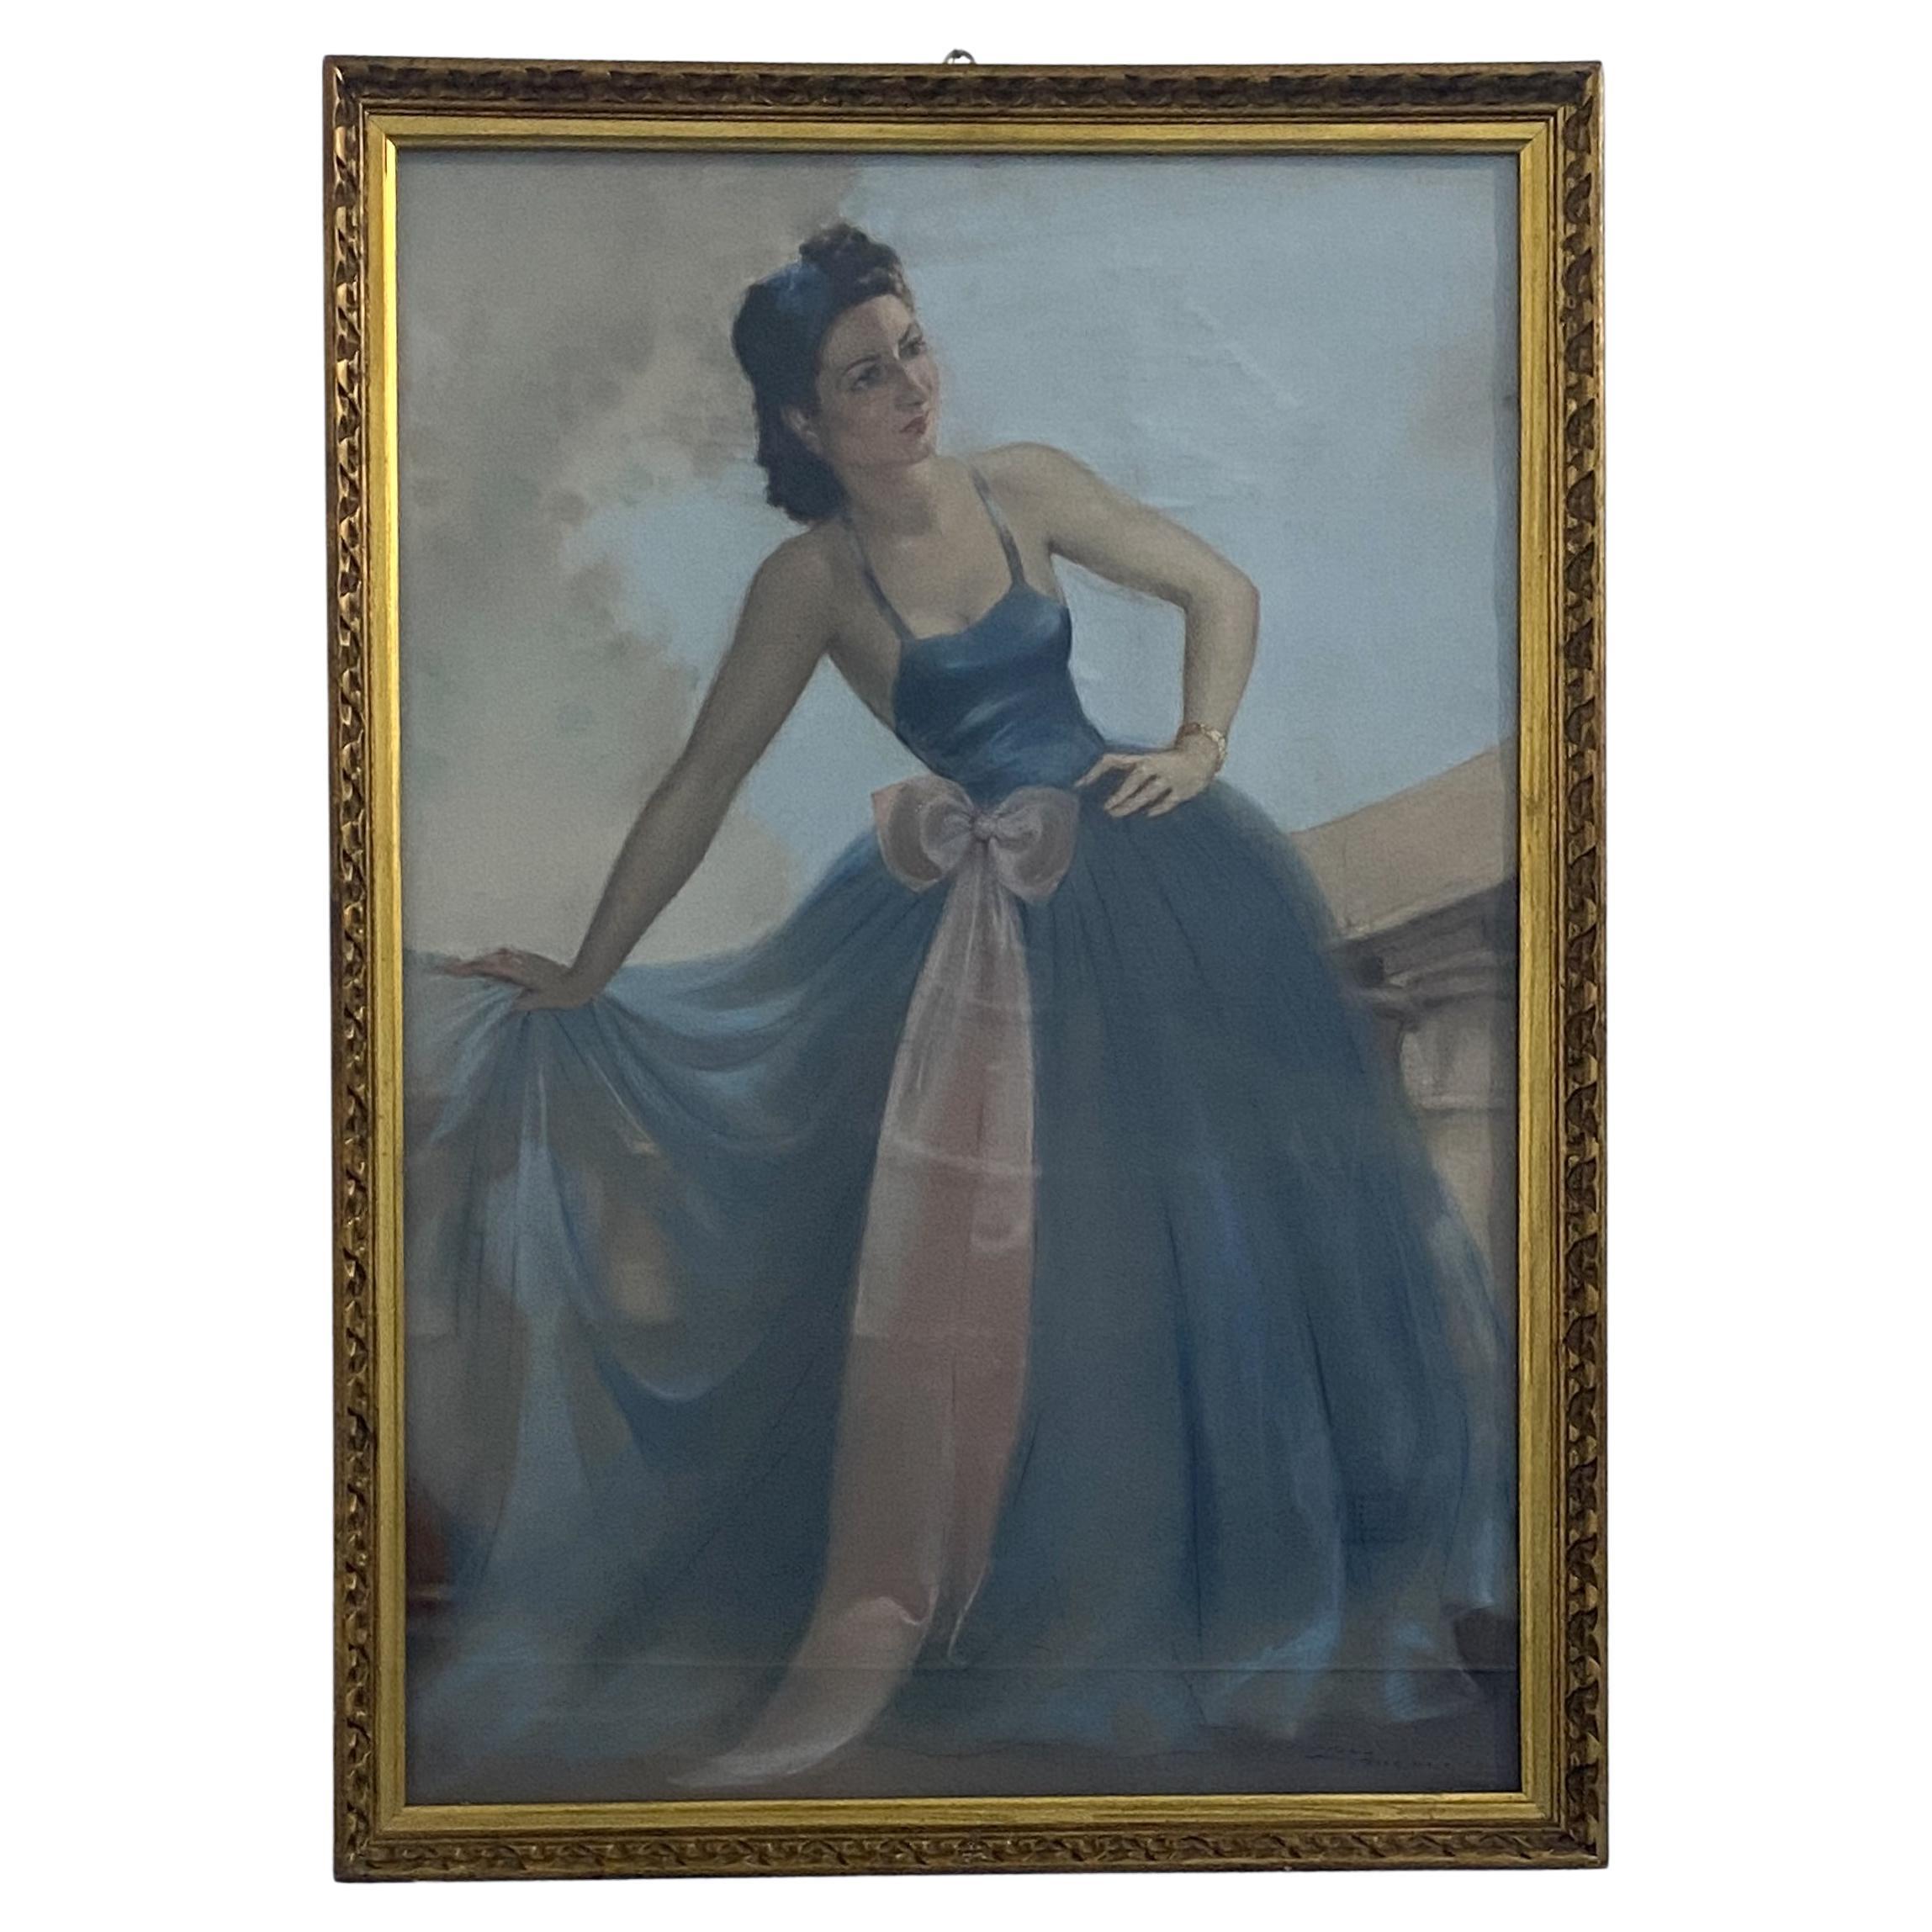 Antique French pastel painting from the 1930s "Young Woman" signed